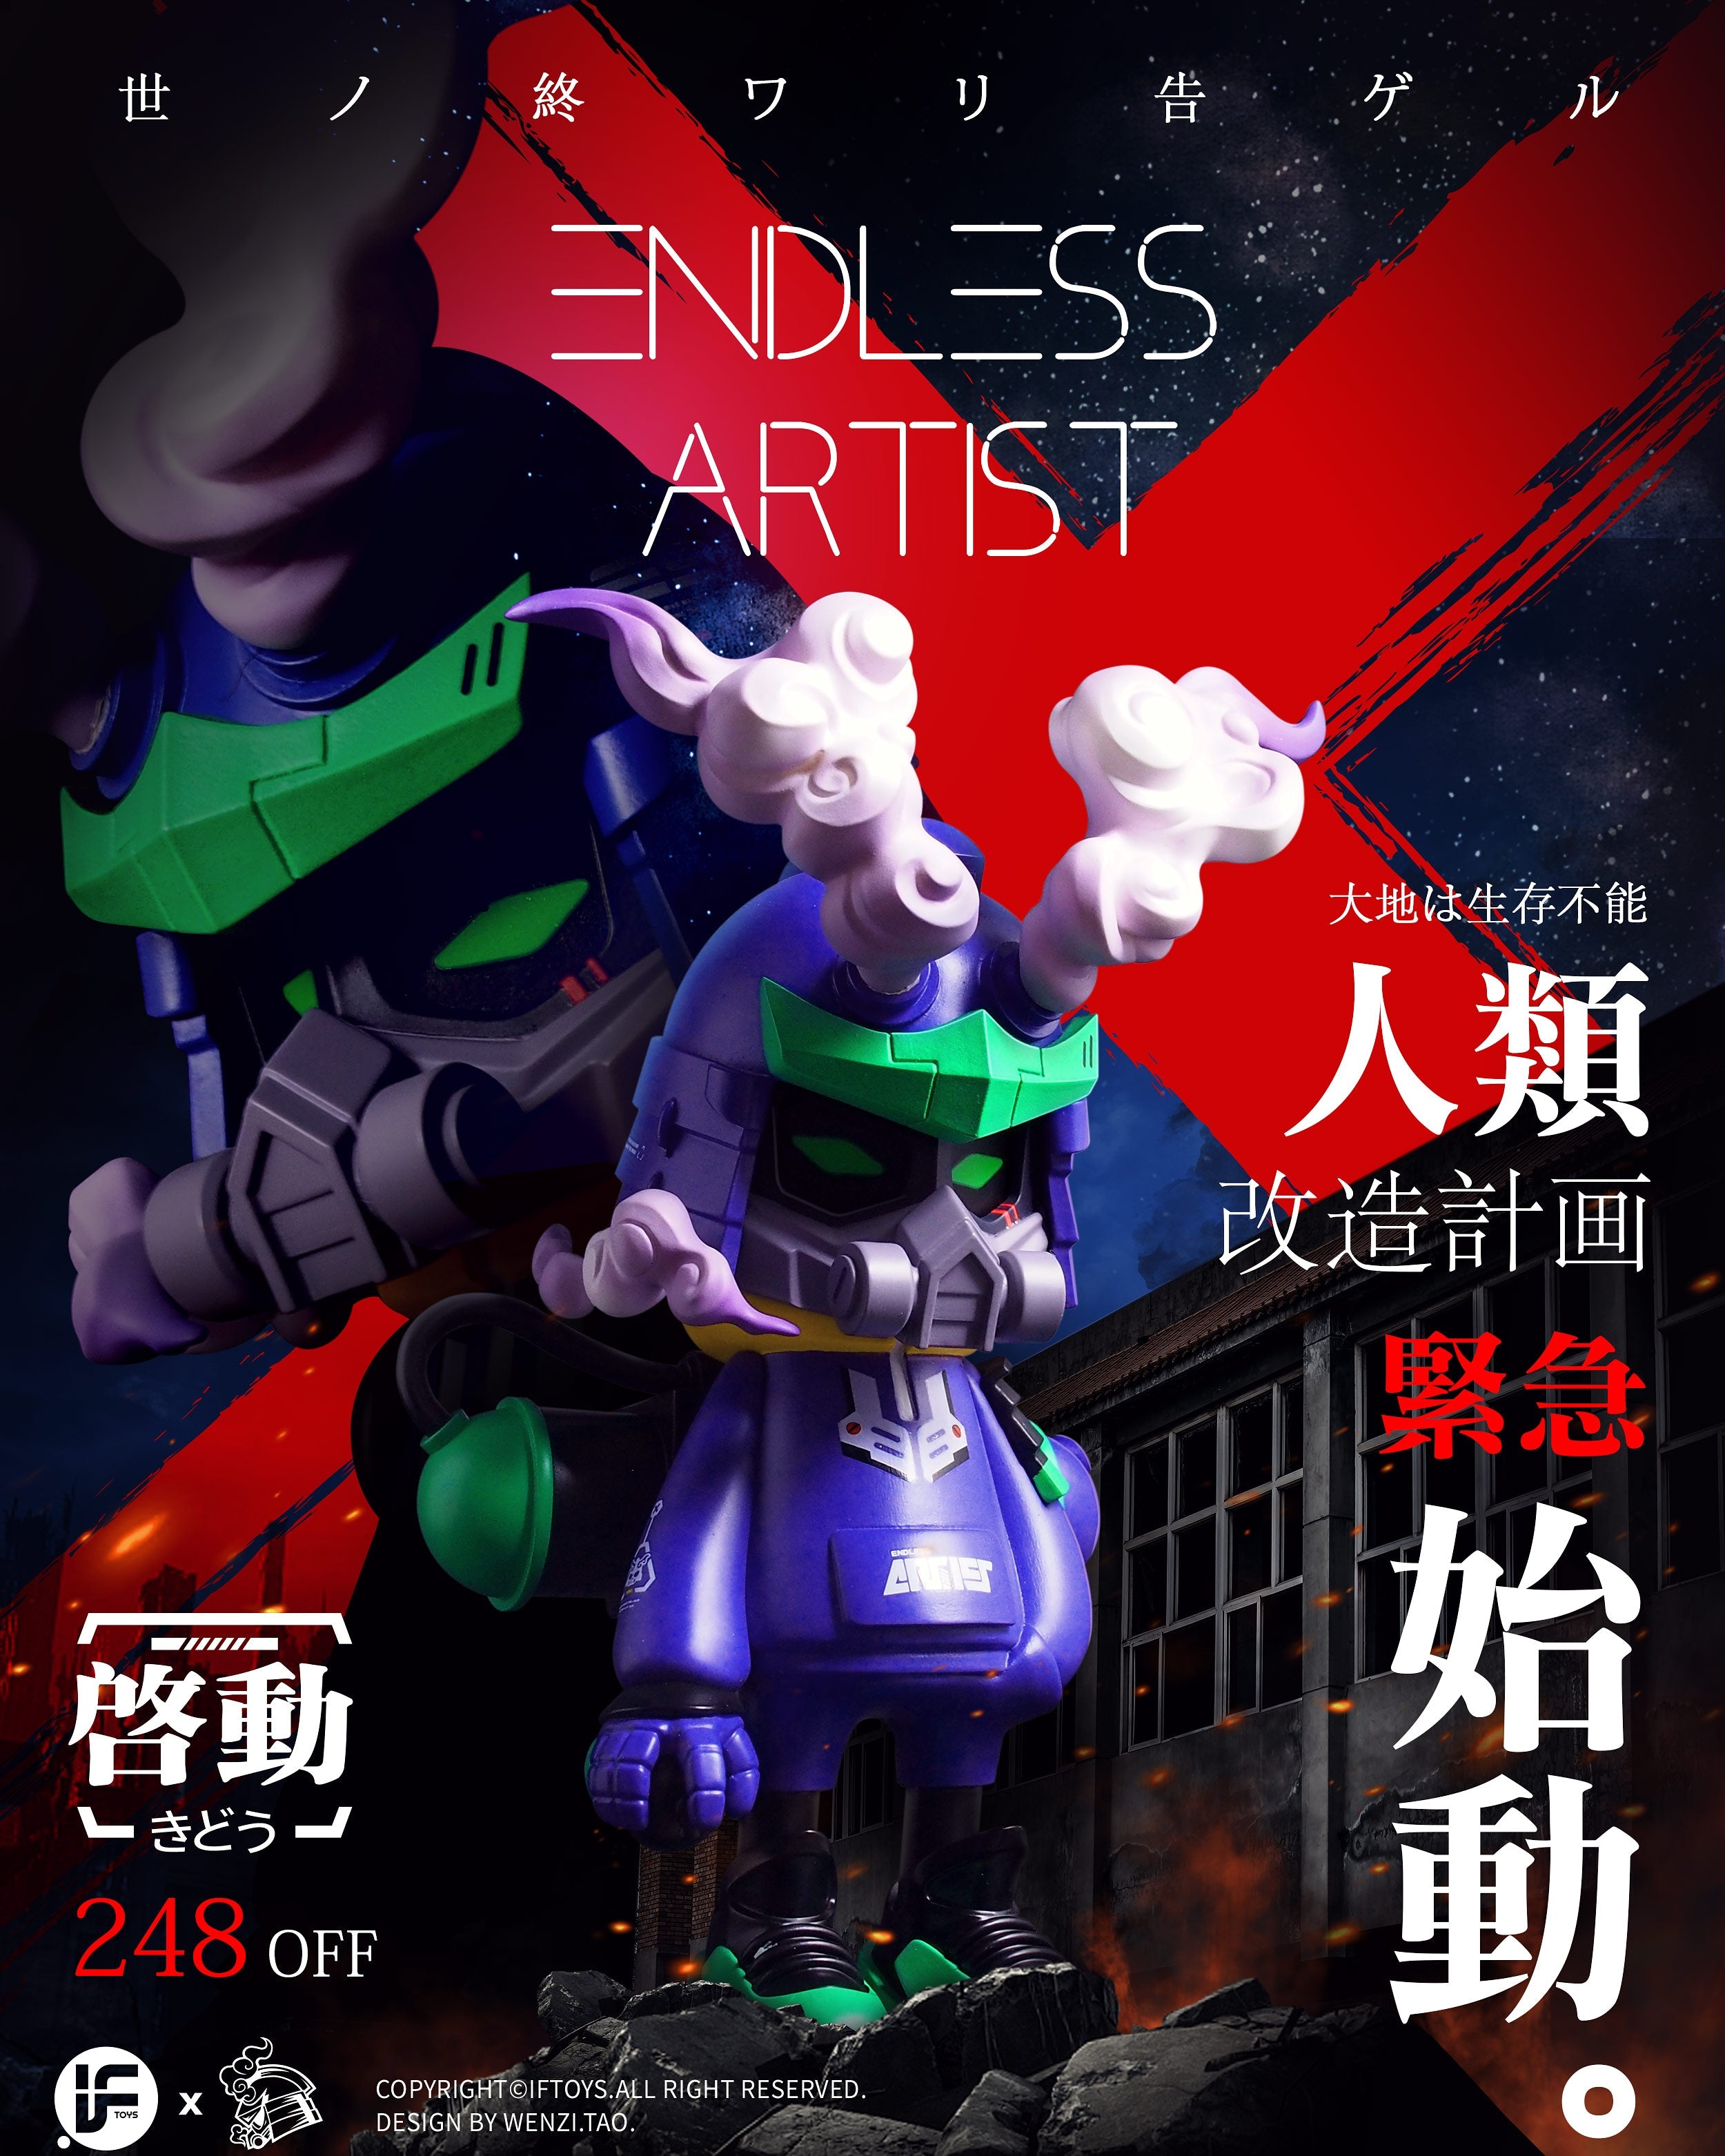 Endless Artist The E9 MACHINE - Limited Edition By Wenzi.Tao x Iftoys